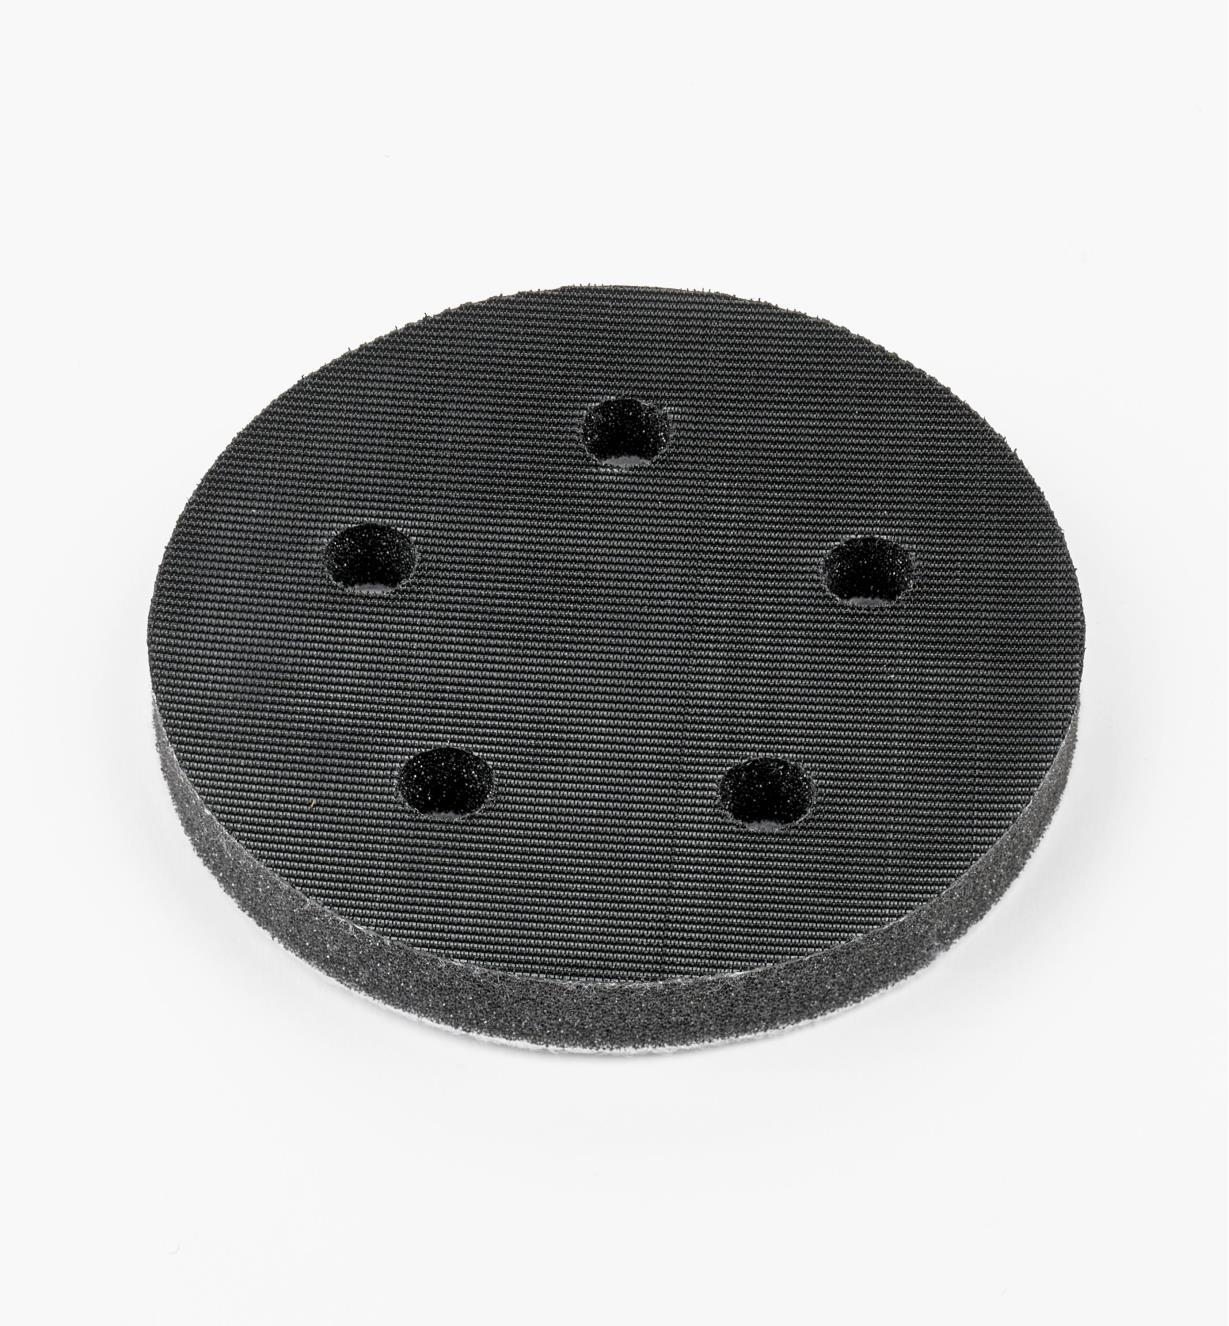 08K1122 - 5" × 1/2" Five-Hole Grip-Faced Interface Pad